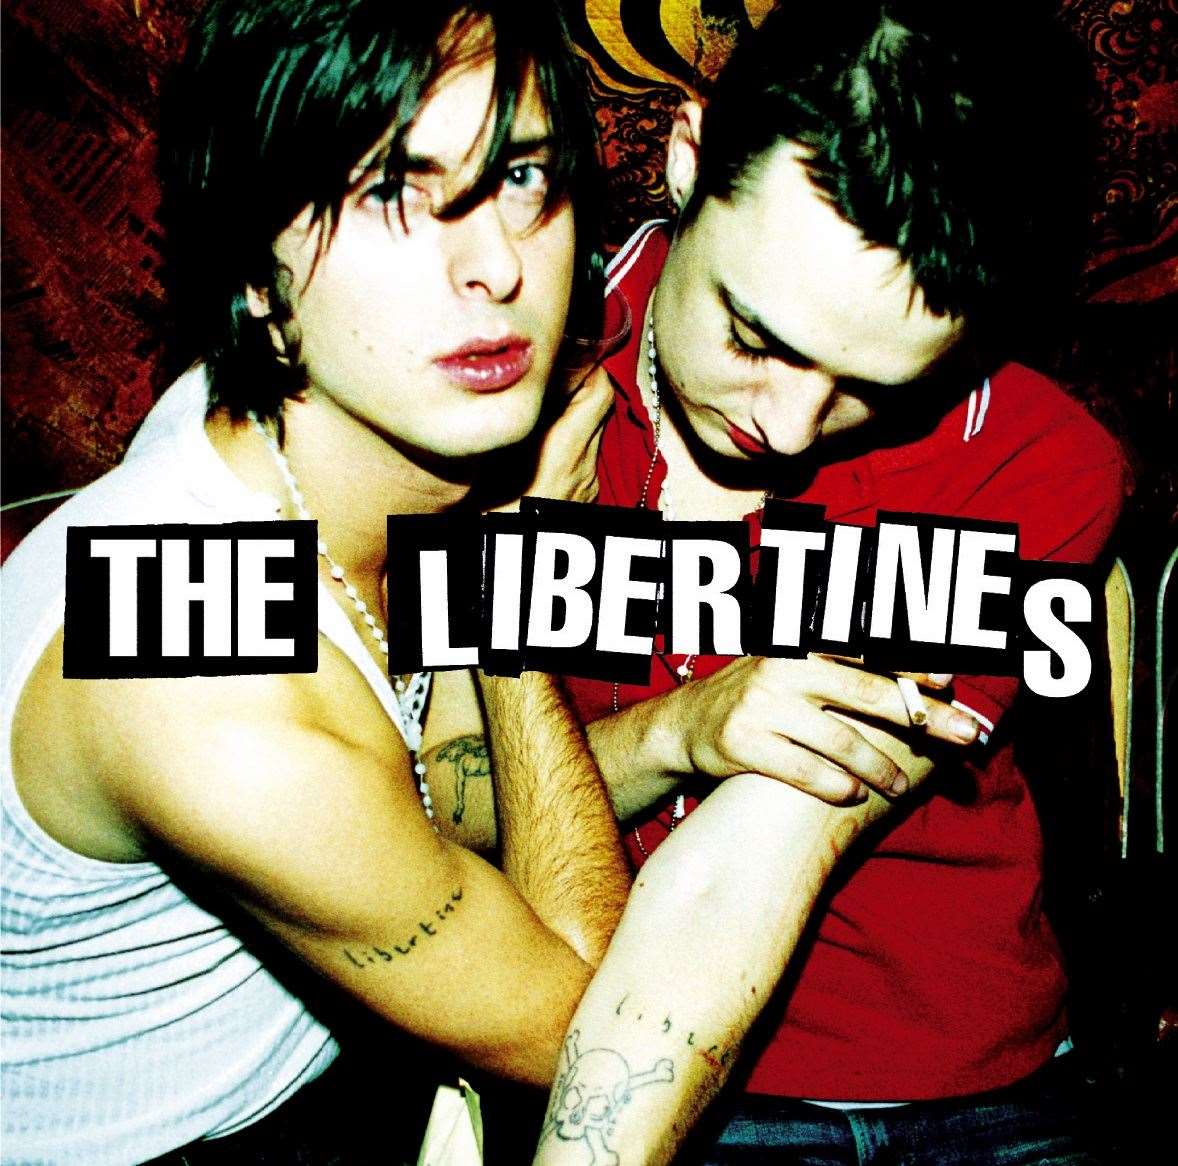 The Libertines album cover, which was shot by Roger Sargent at the Tap 'n' Tin